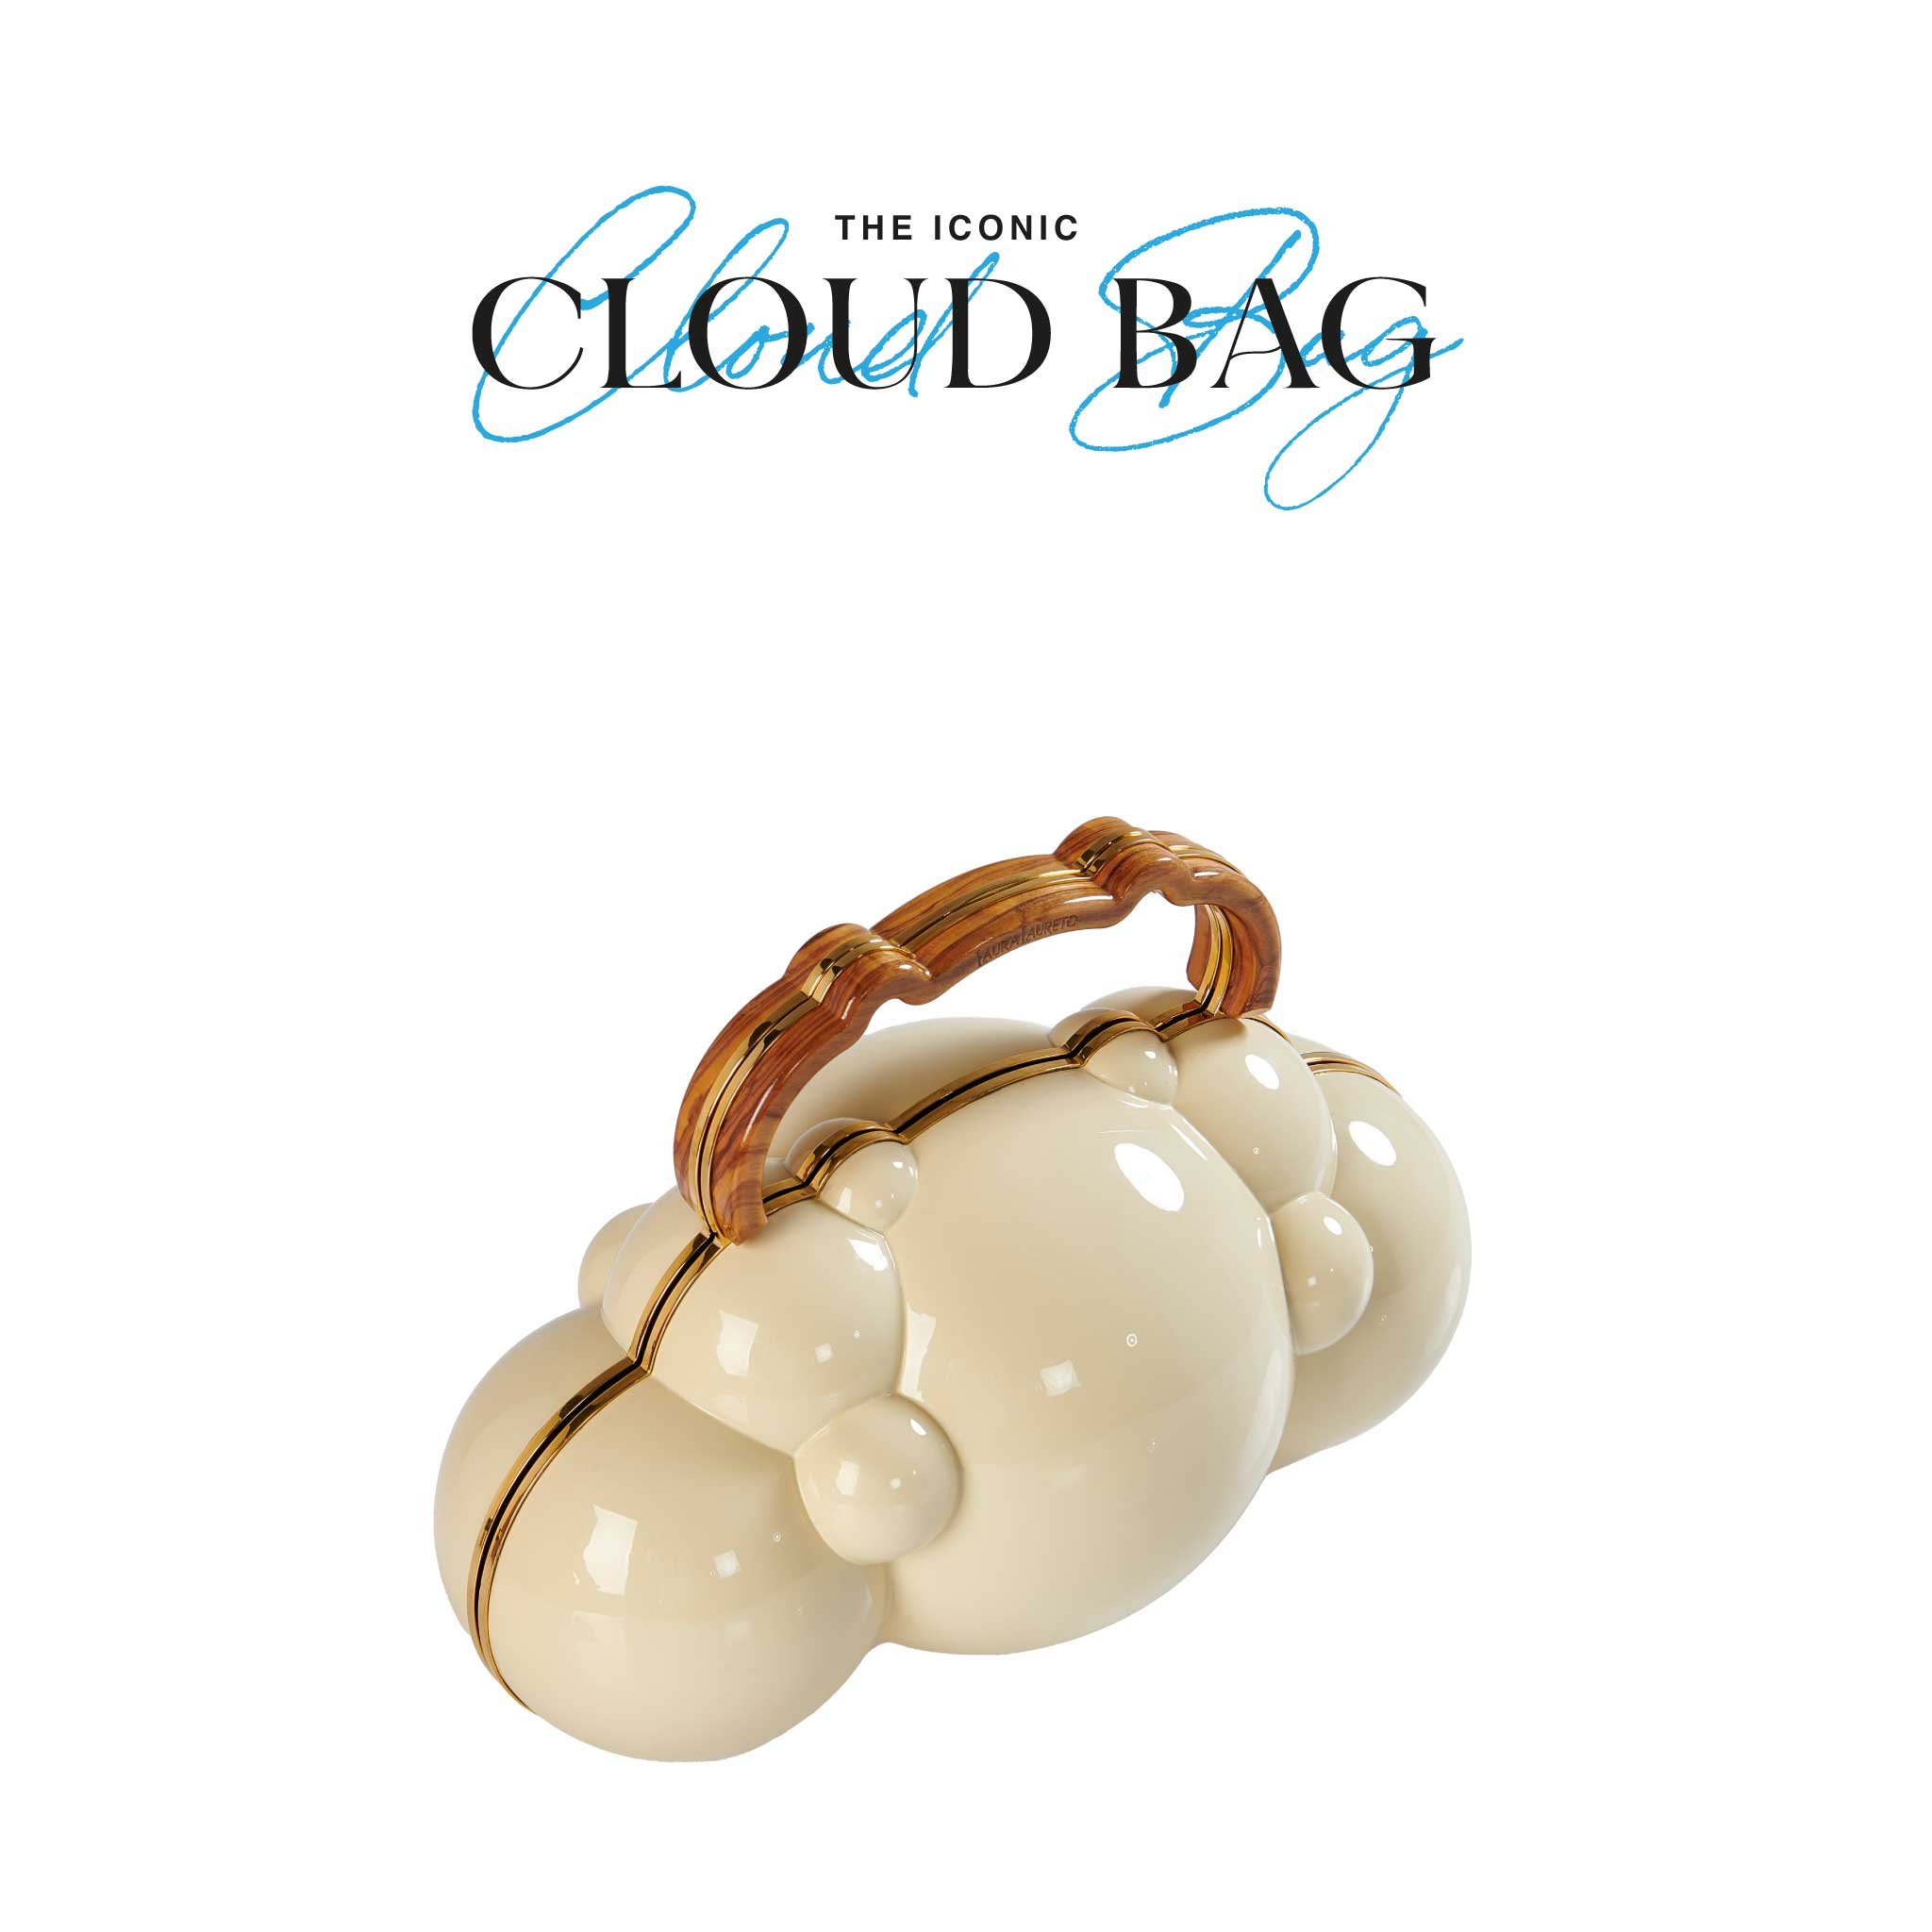 The iconic Cloud Bag®